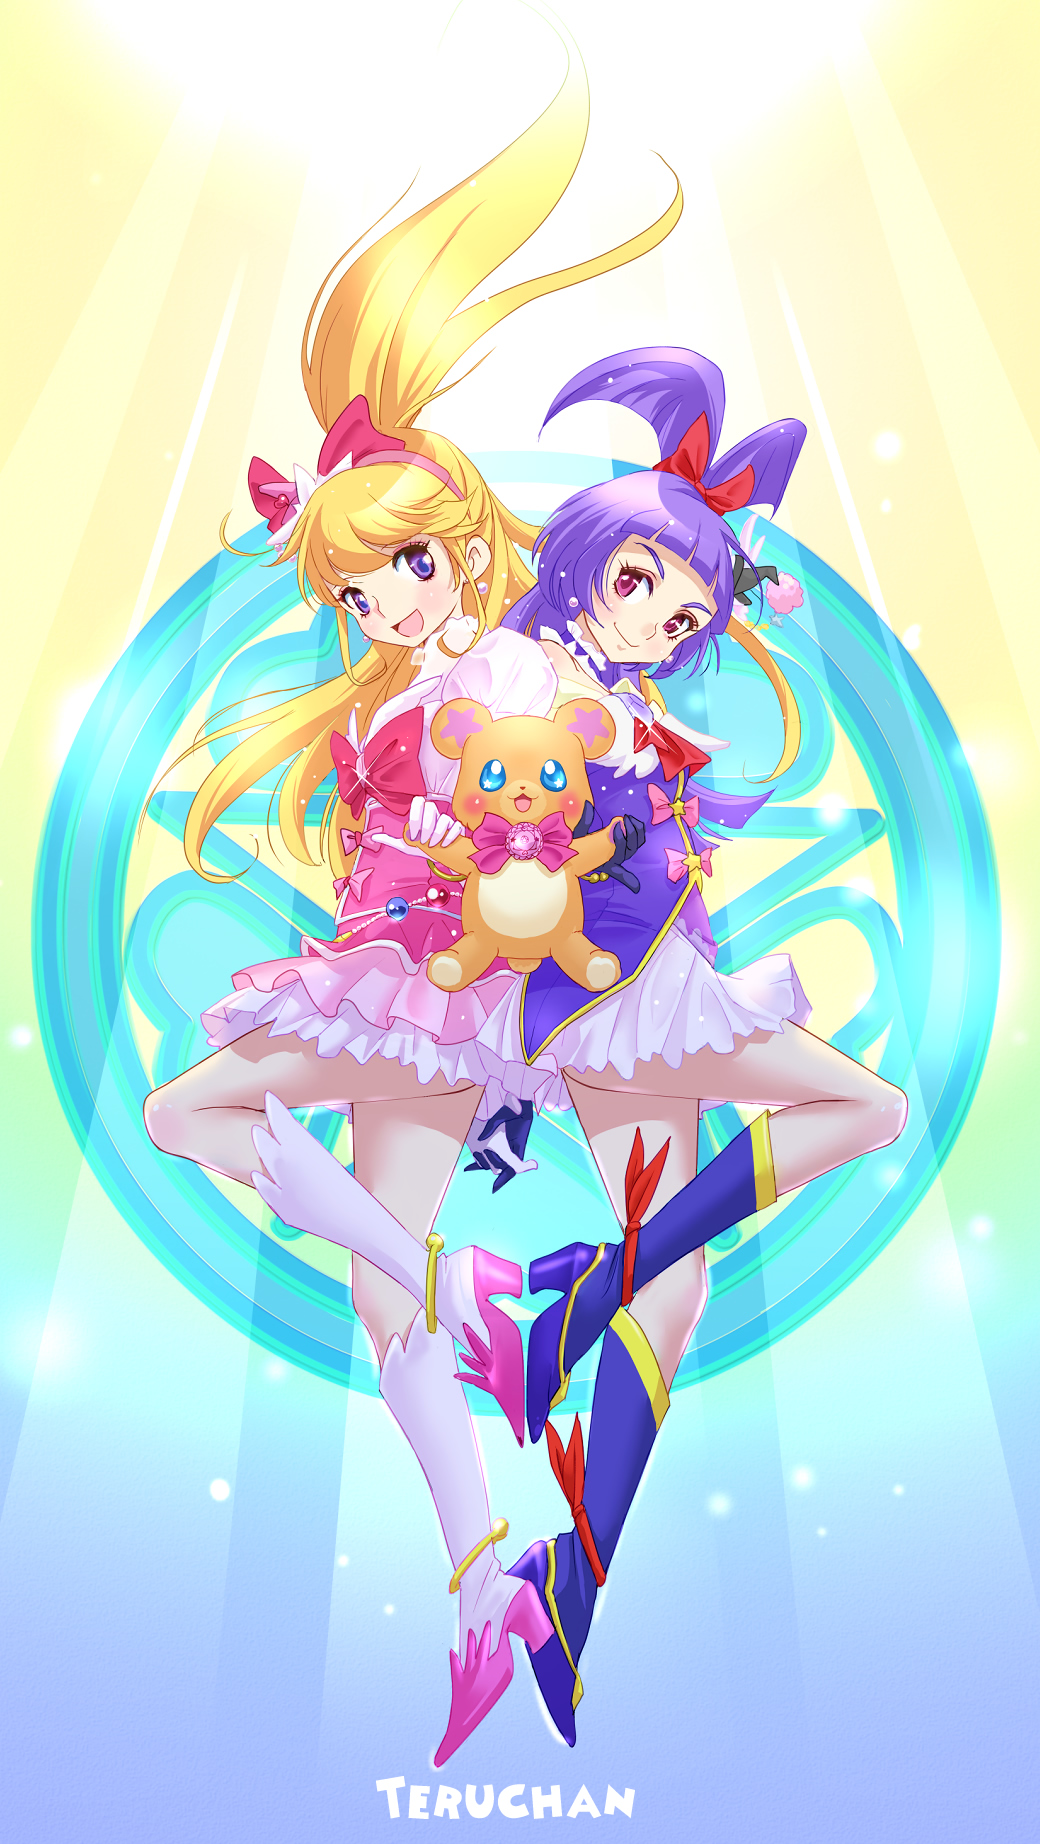 2girls :d asahina_mirai bear black_boots black_gloves black_hat blonde_hair boots bow creature cure_magical cure_miracle earrings full_body gloves hair_bow hat highres holding_hands izayoi_liko jewelry knee_boots long_hair looking_at_viewer magical_girl mahou_girls_precure! mini_hat mini_witch_hat mofurun_(mahou_girls_precure!) multiple_girls open_mouth pink_bow pink_hat pink_skirt ponytail precure red_bow skirt smile teruchan violet_eyes white_boots white_gloves white_skirt witch_hat